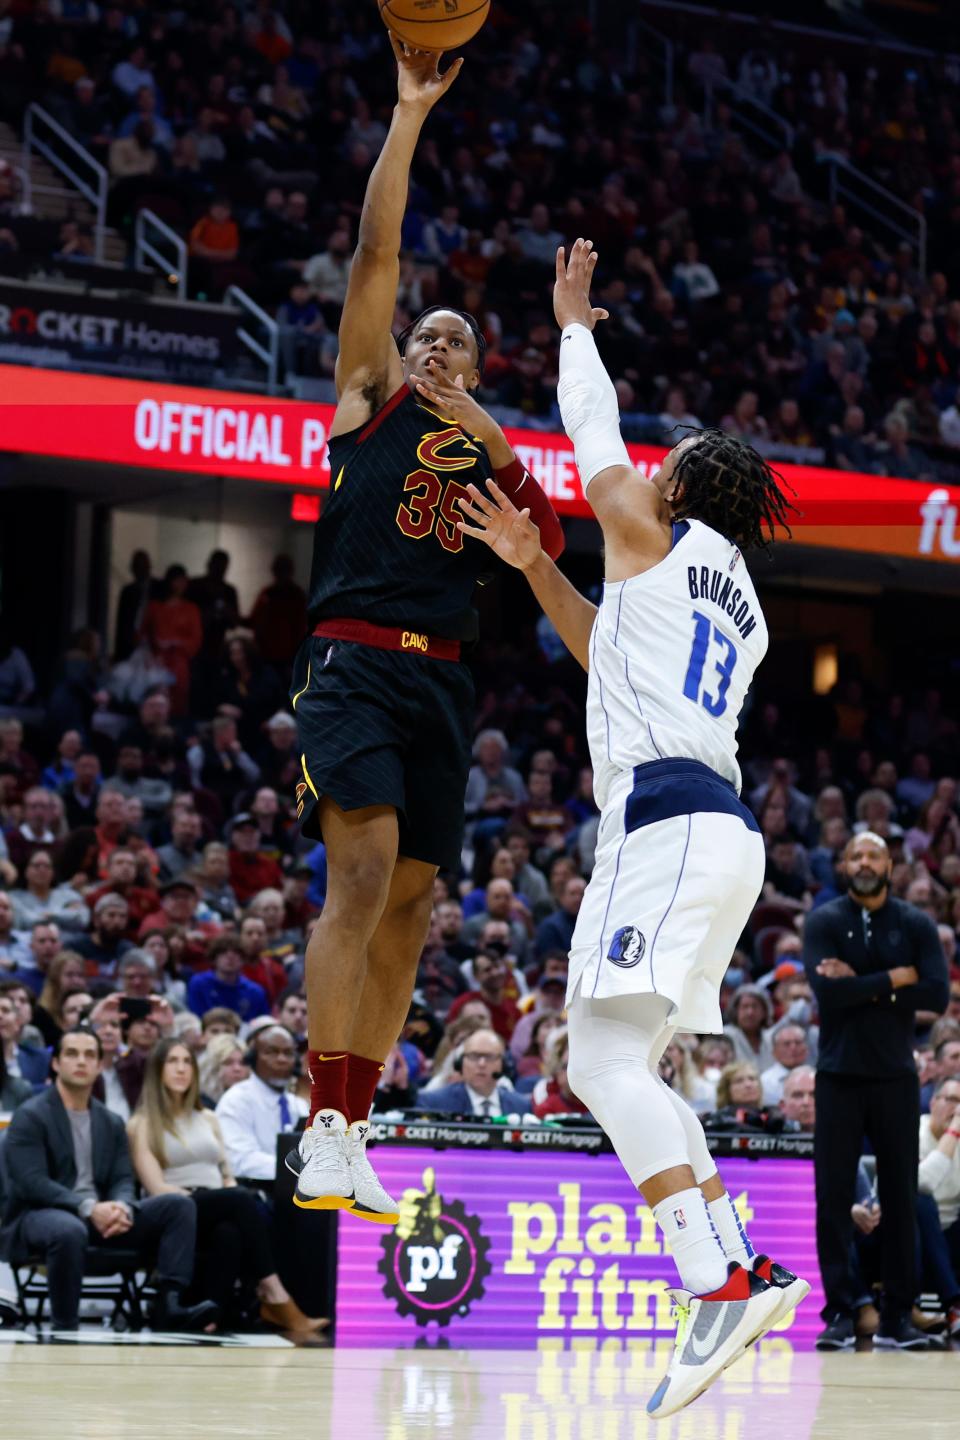 Cleveland Cavaliers guard Isaac Okoro (35) shoots against Dallas Mavericks guard Jalen Brunson (13) during the first half of an NBA basketball game Wednesday, March 30, 2022, in Cleveland. (AP Photo/Ron Schwane)